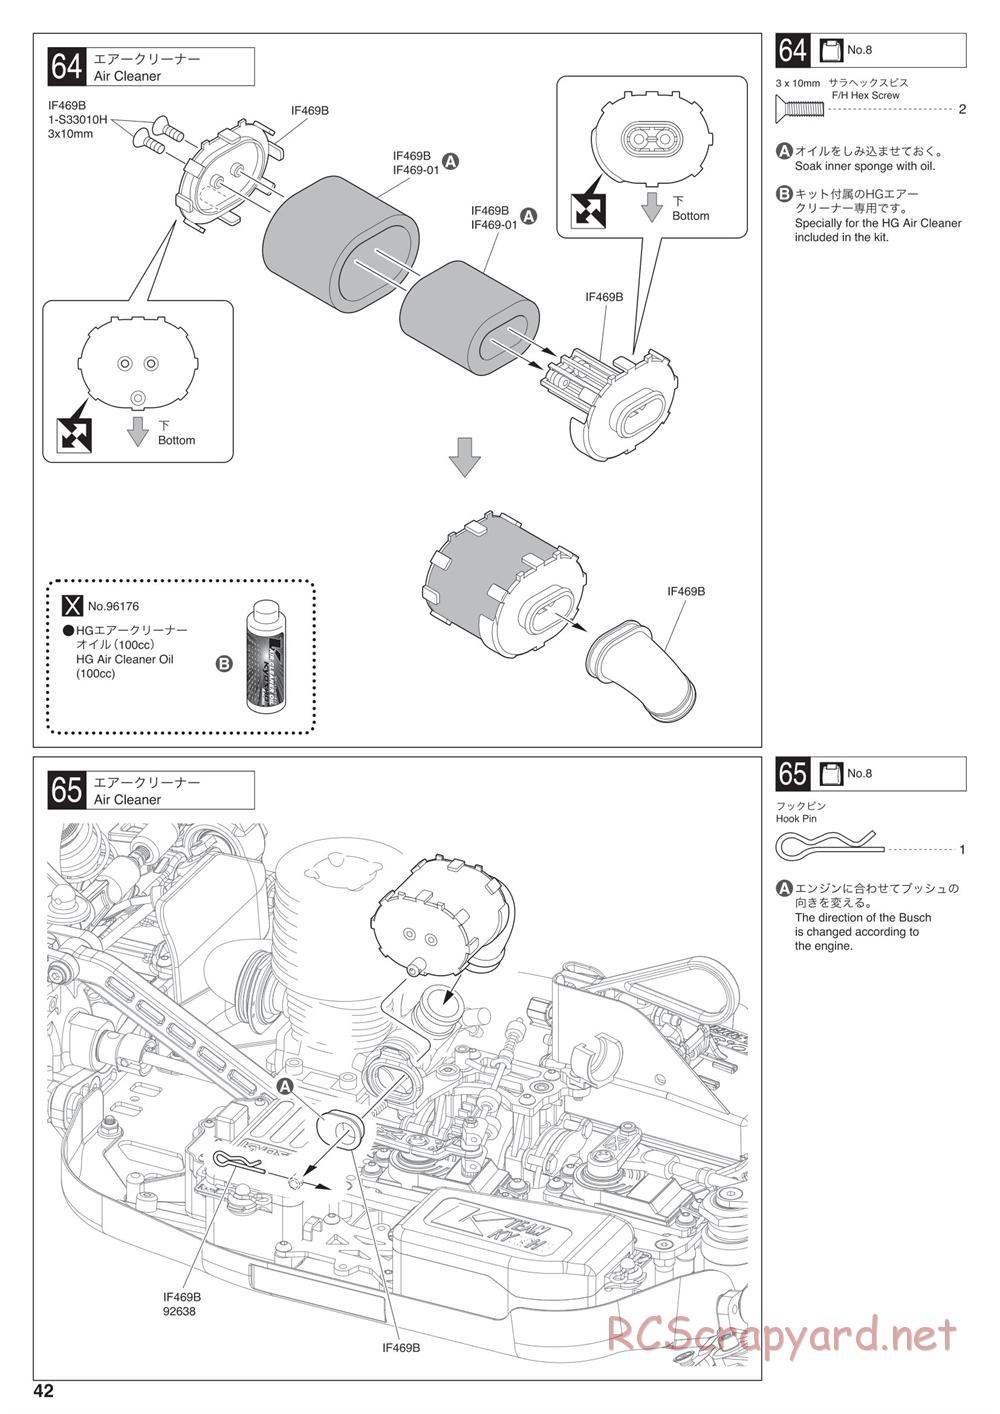 Kyosho - Inferno MP10 - Manual - Page 42